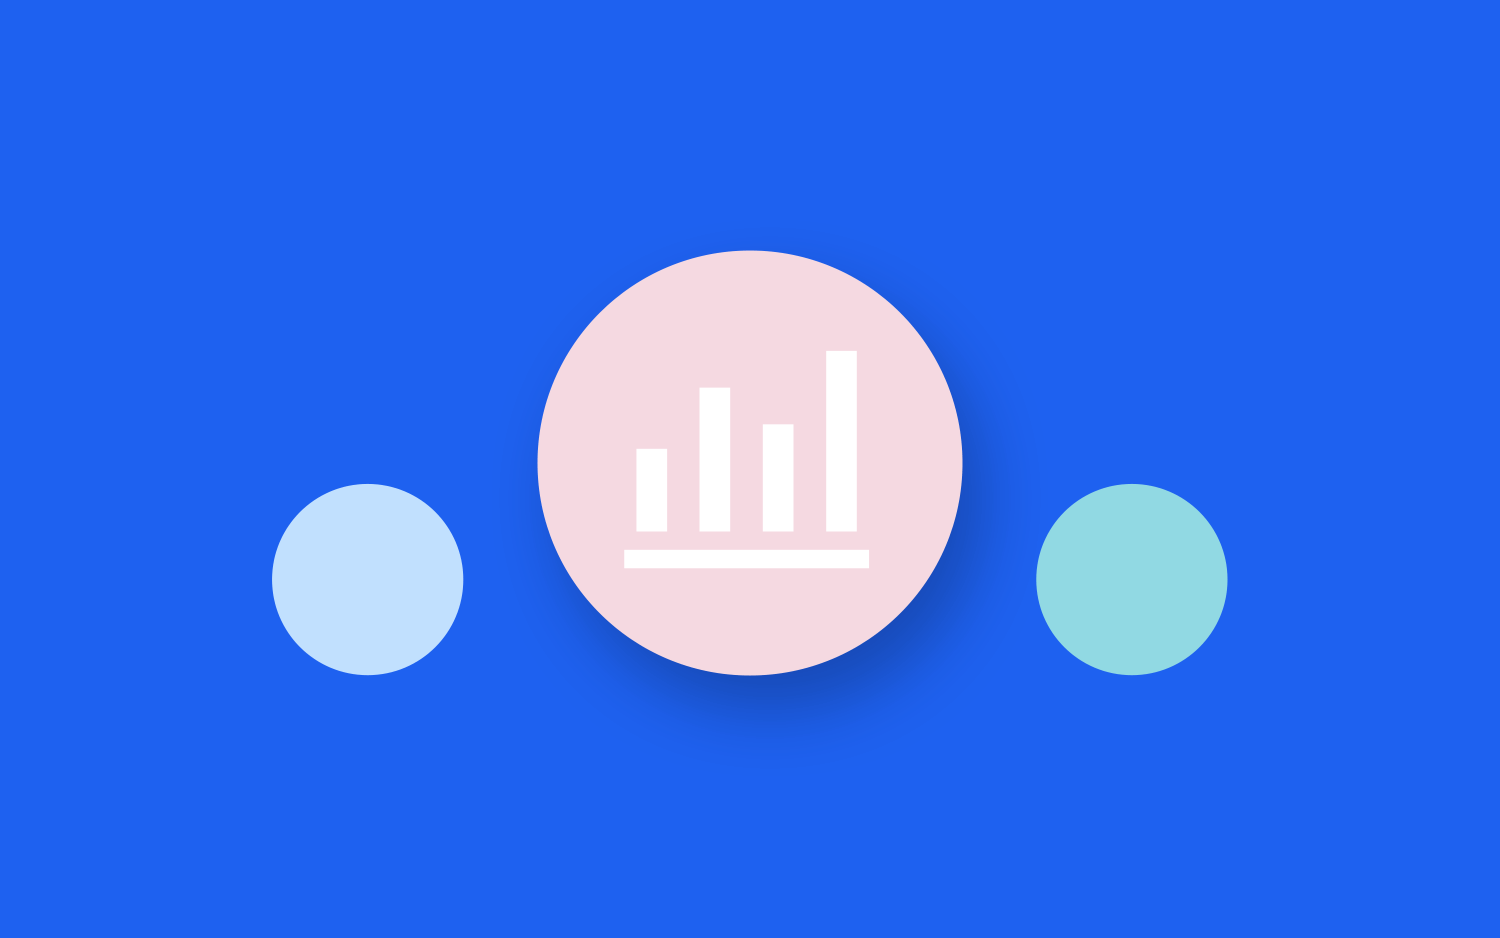 Blue background with light colored dots and a graph